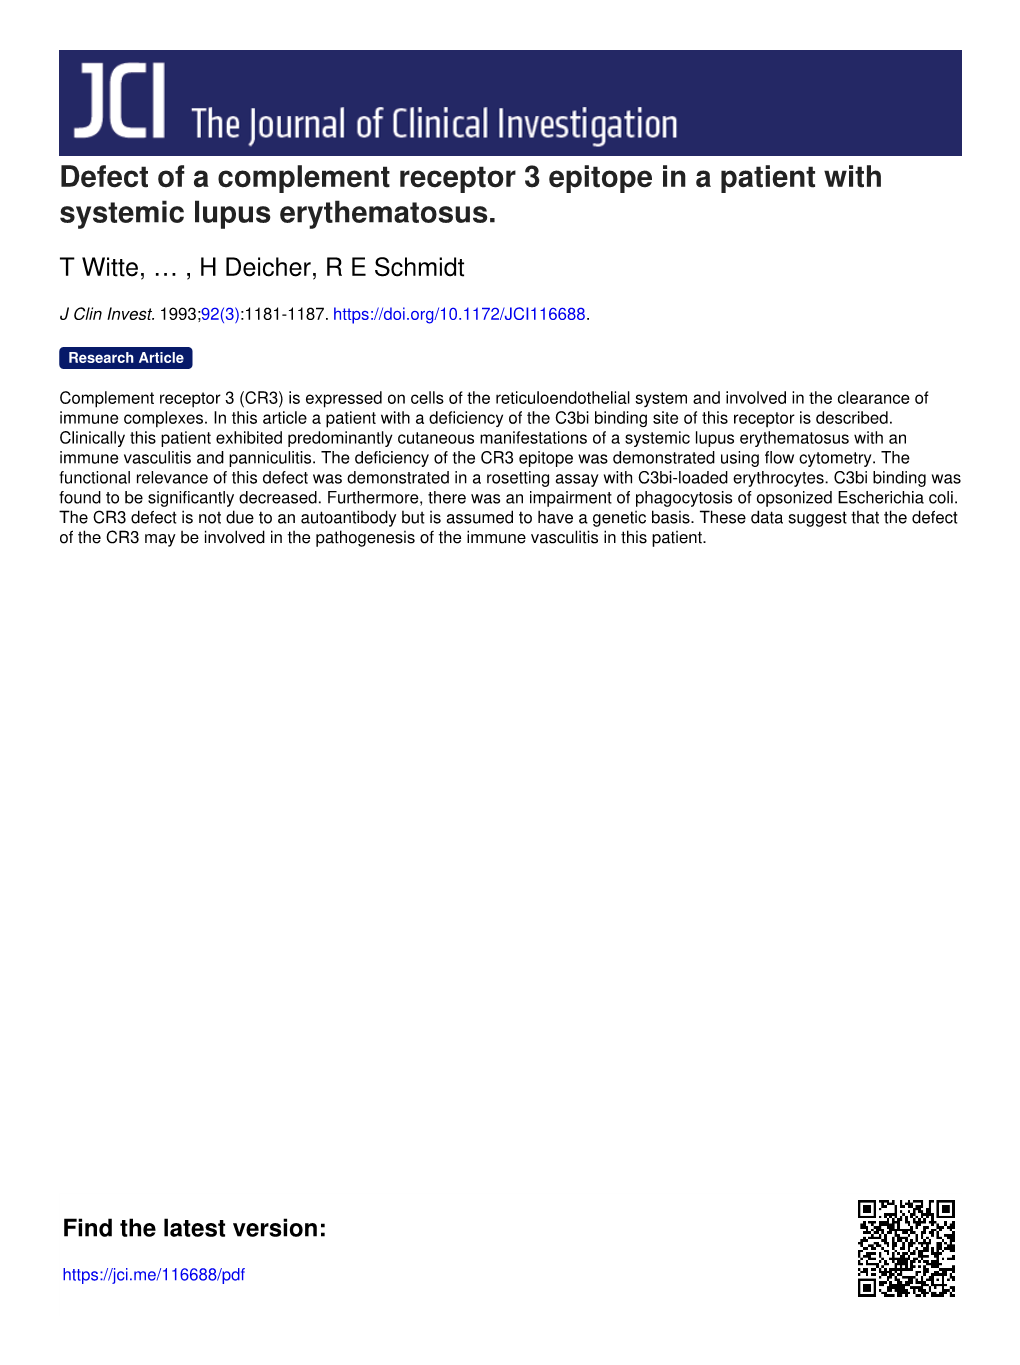 Defect of a Complement Receptor 3 Epitope in a Patient with Systemic Lupus Erythematosus